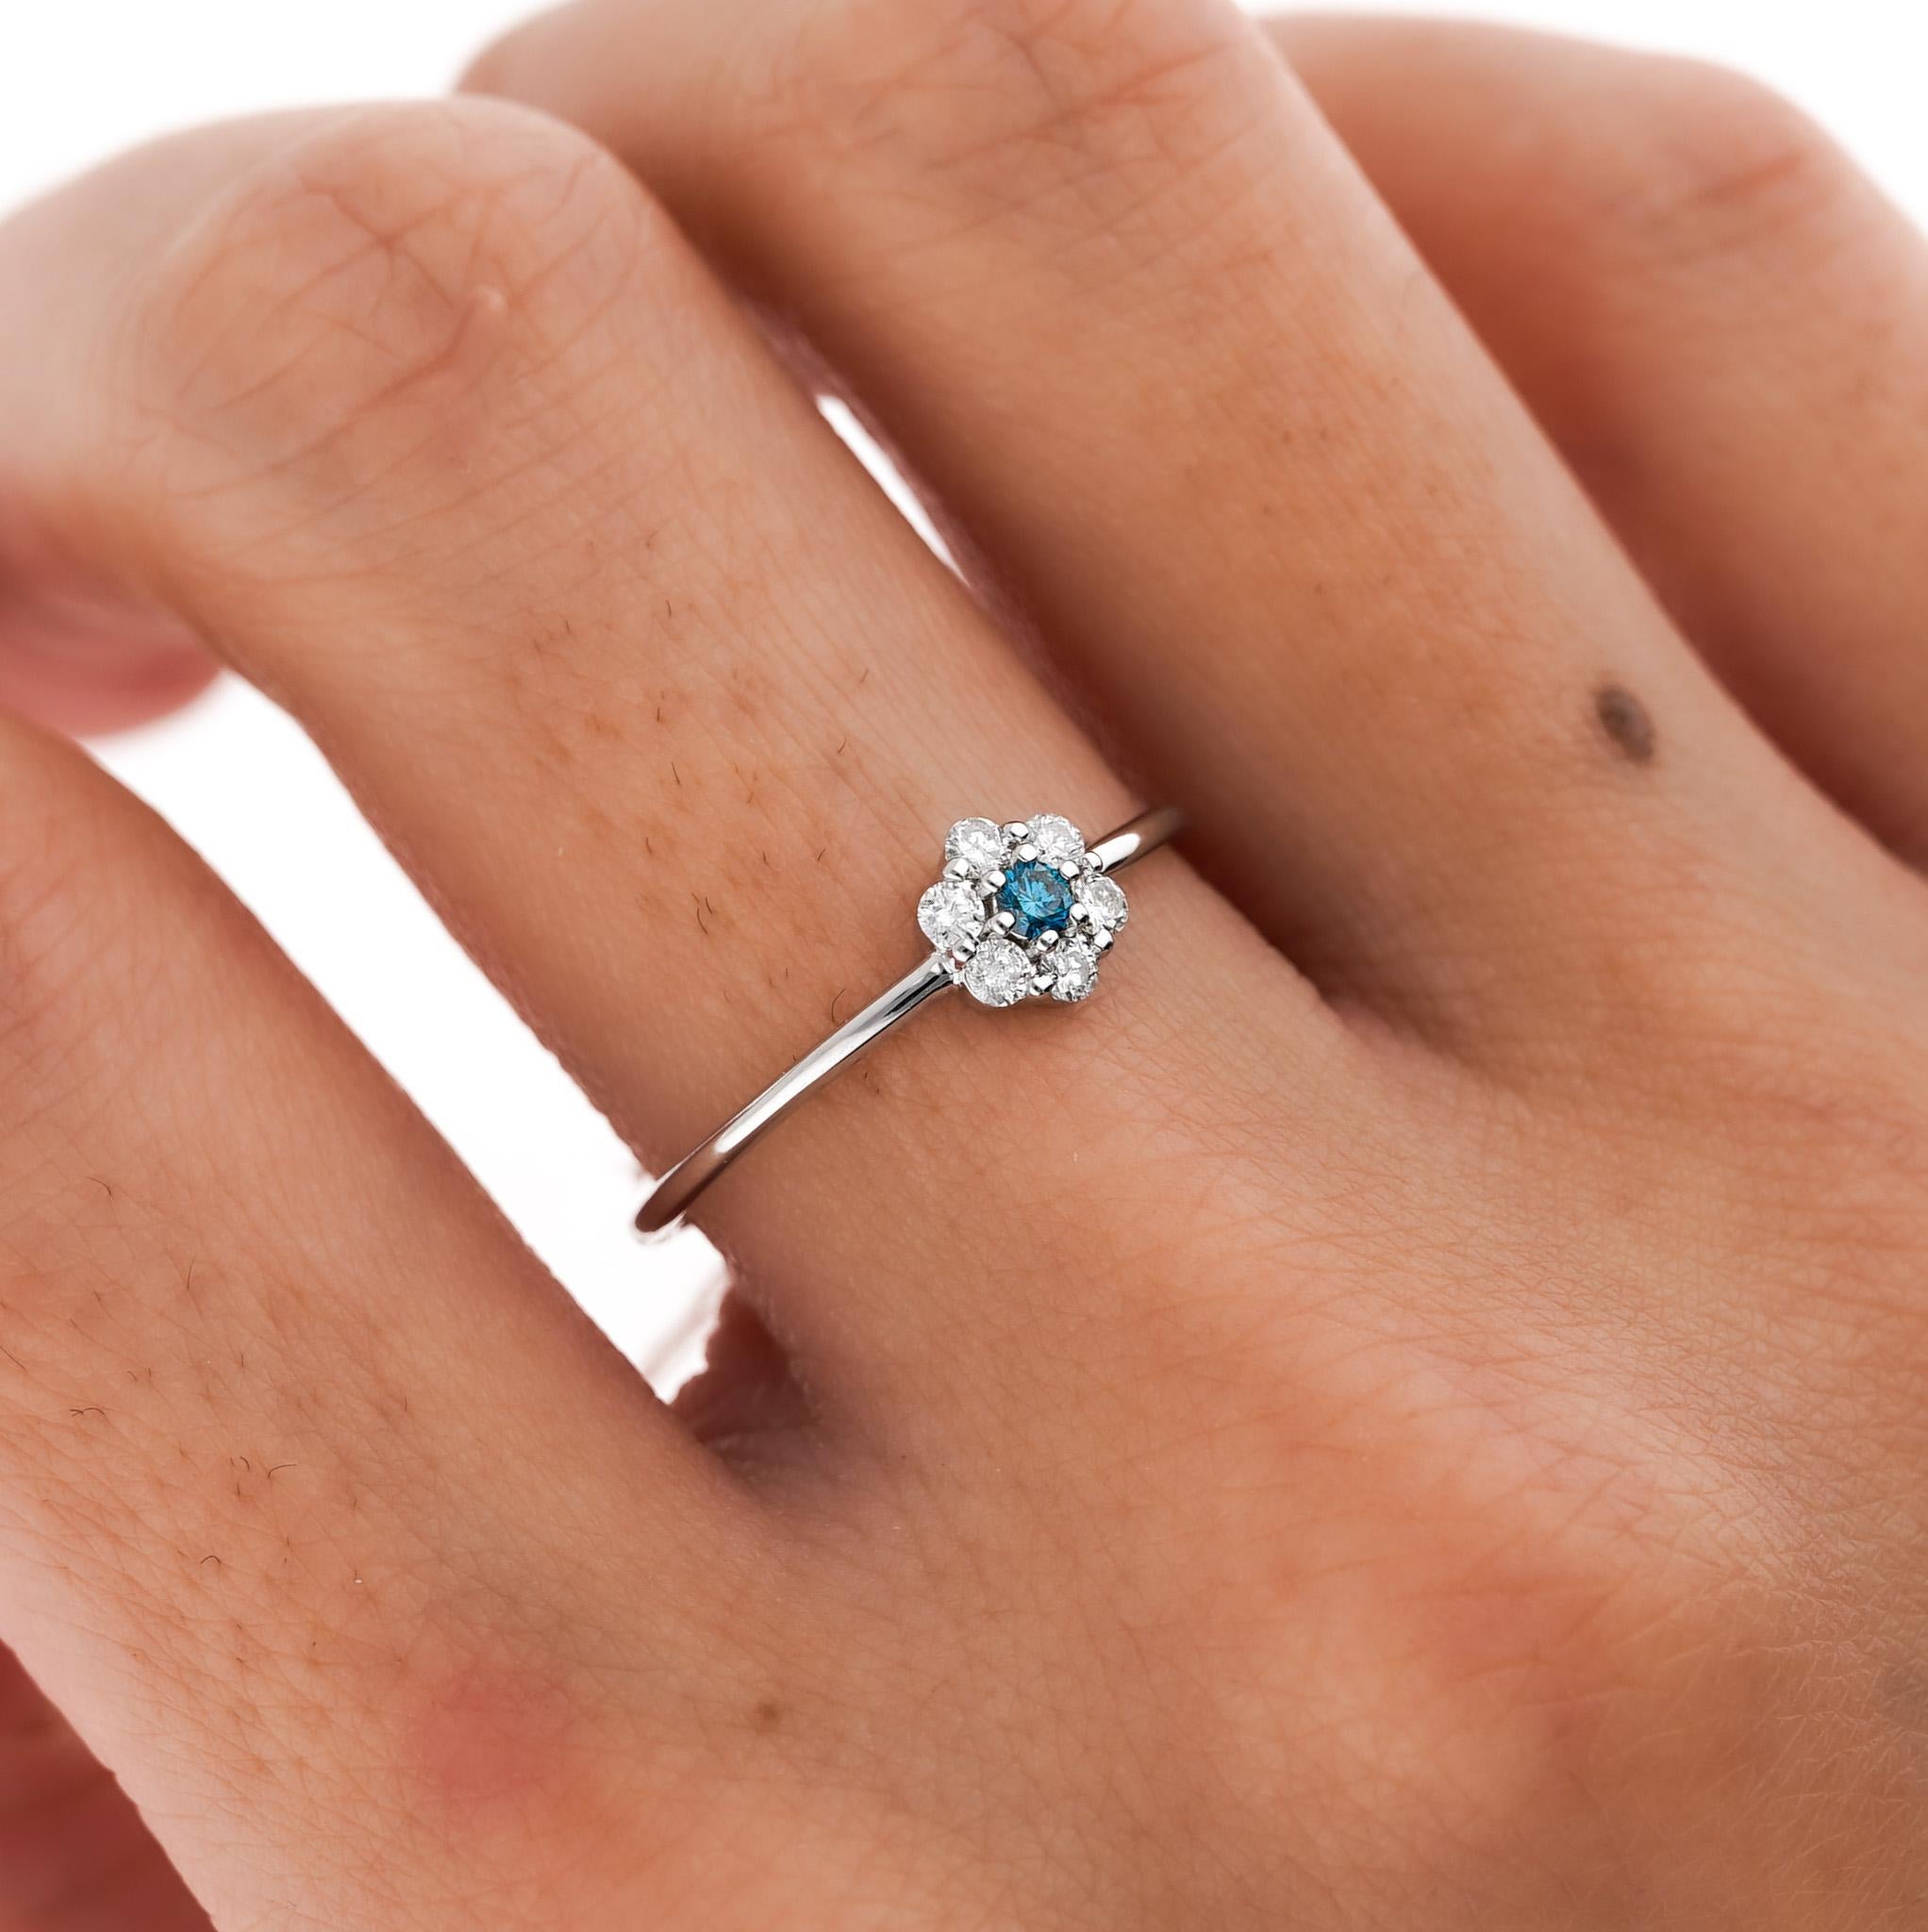 Cute, thin, and dainty. Get the perfect fine jewelry gift without breaking the bank. 

Set with natural blue and white diamonds and 14k solid gold. 

Details: 
✔ Metal: 14k White Gold
✔ Size: 6
✔ Weight: 0.90 grams
✔ Band/Shank Width: 1.12mm 